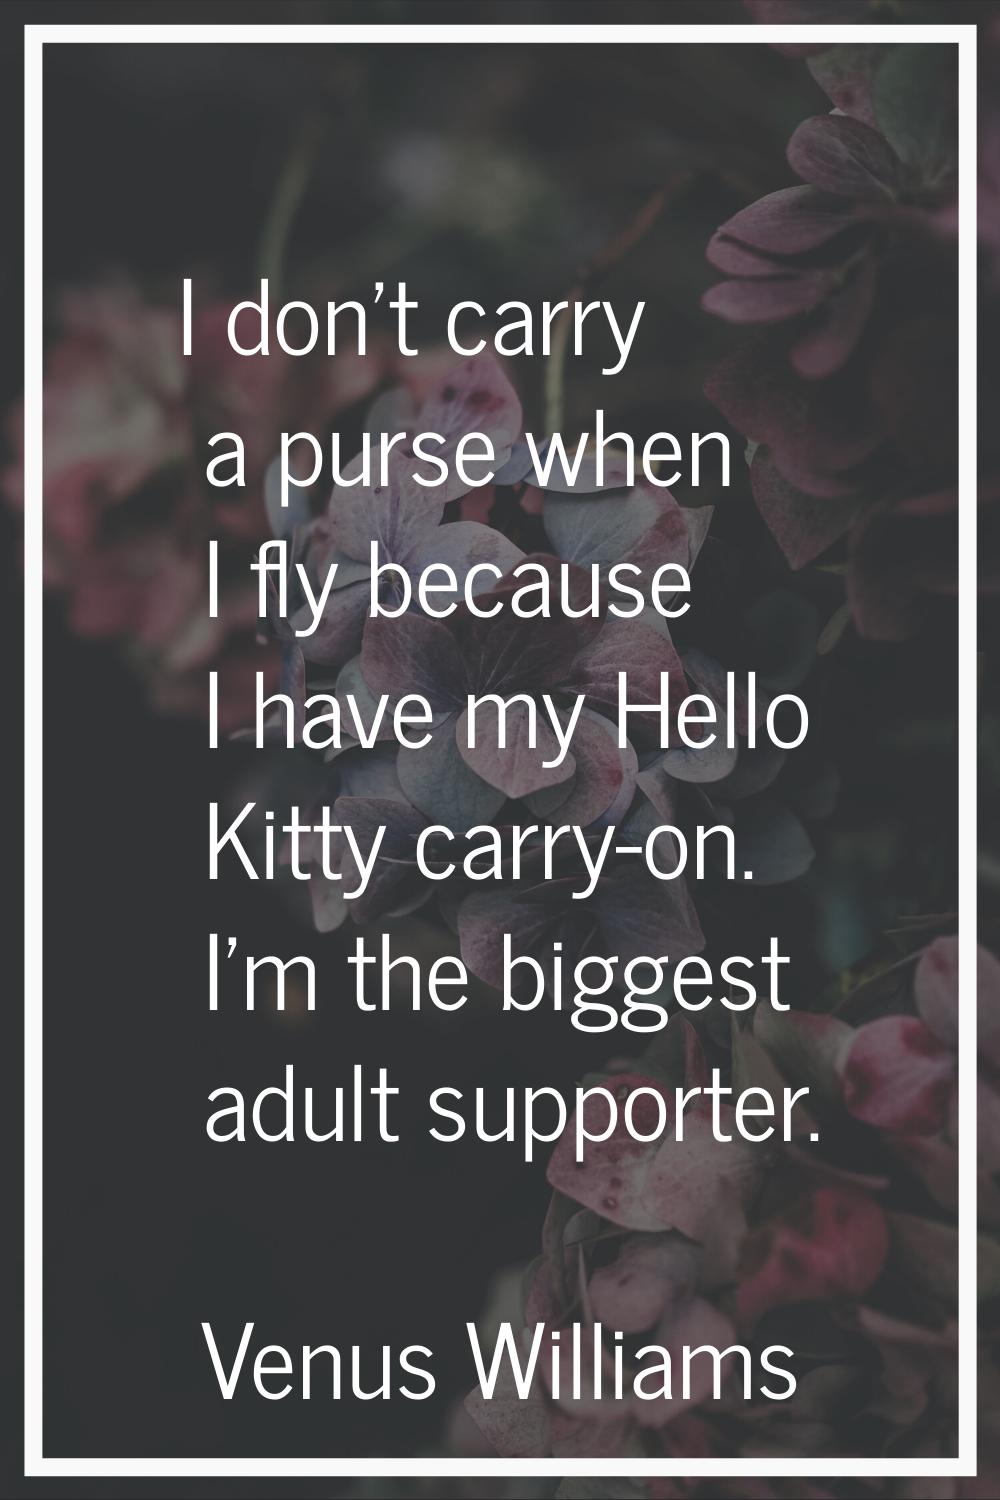 I don't carry a purse when I fly because I have my Hello Kitty carry-on. I'm the biggest adult supp